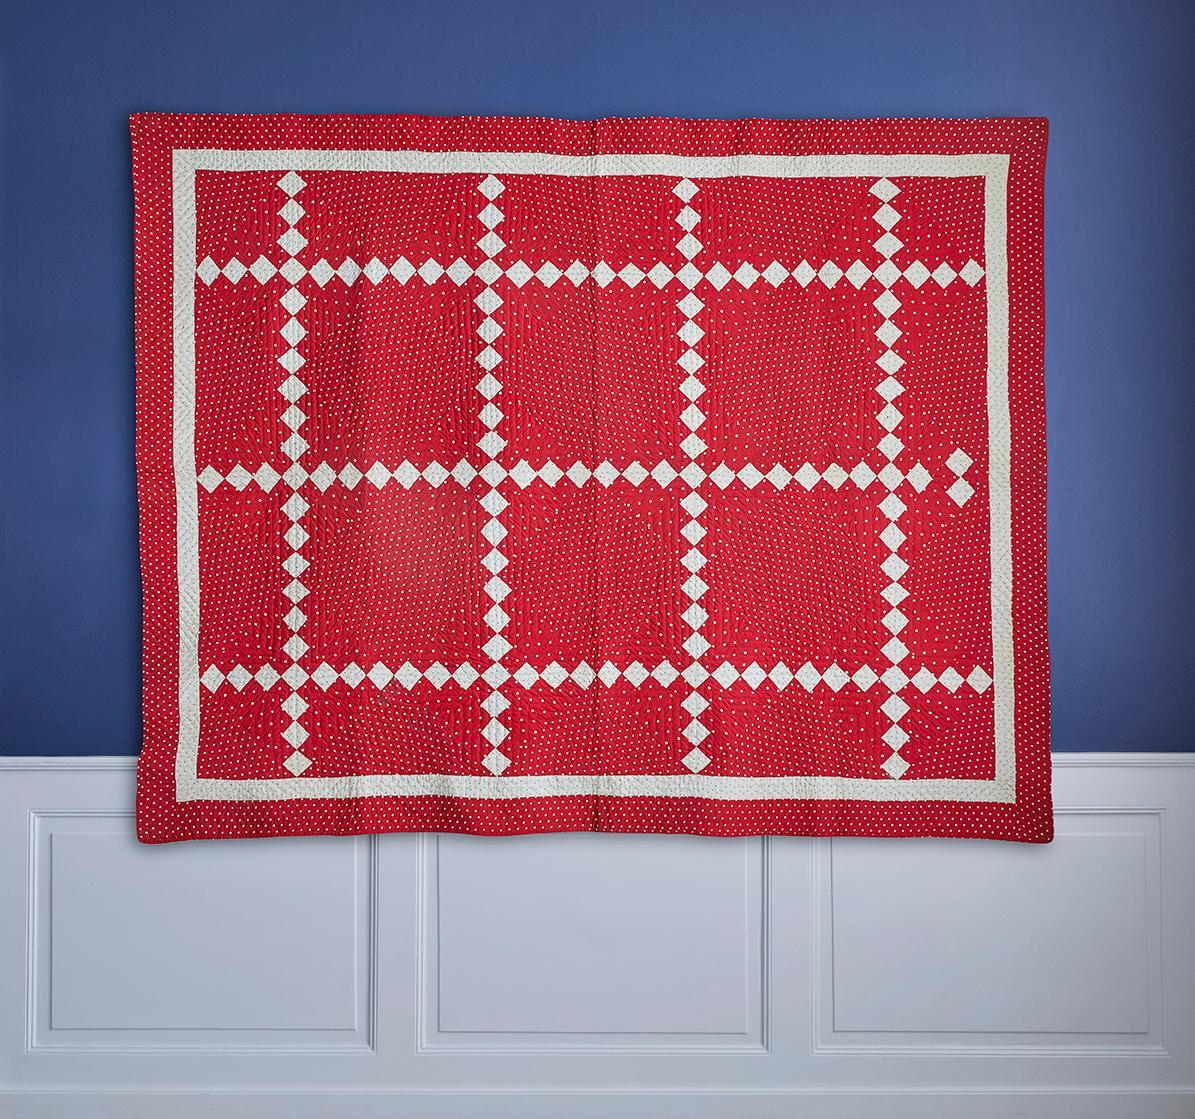 Vibrant 1890s red and white Irish chain nine patch antique quilt. The quilt is hand pieced and hand quilted, with wonderful dot fabrics of different scale. The quilt came out of Stark County, Ohio. 

It is in excellent, never washed condition,